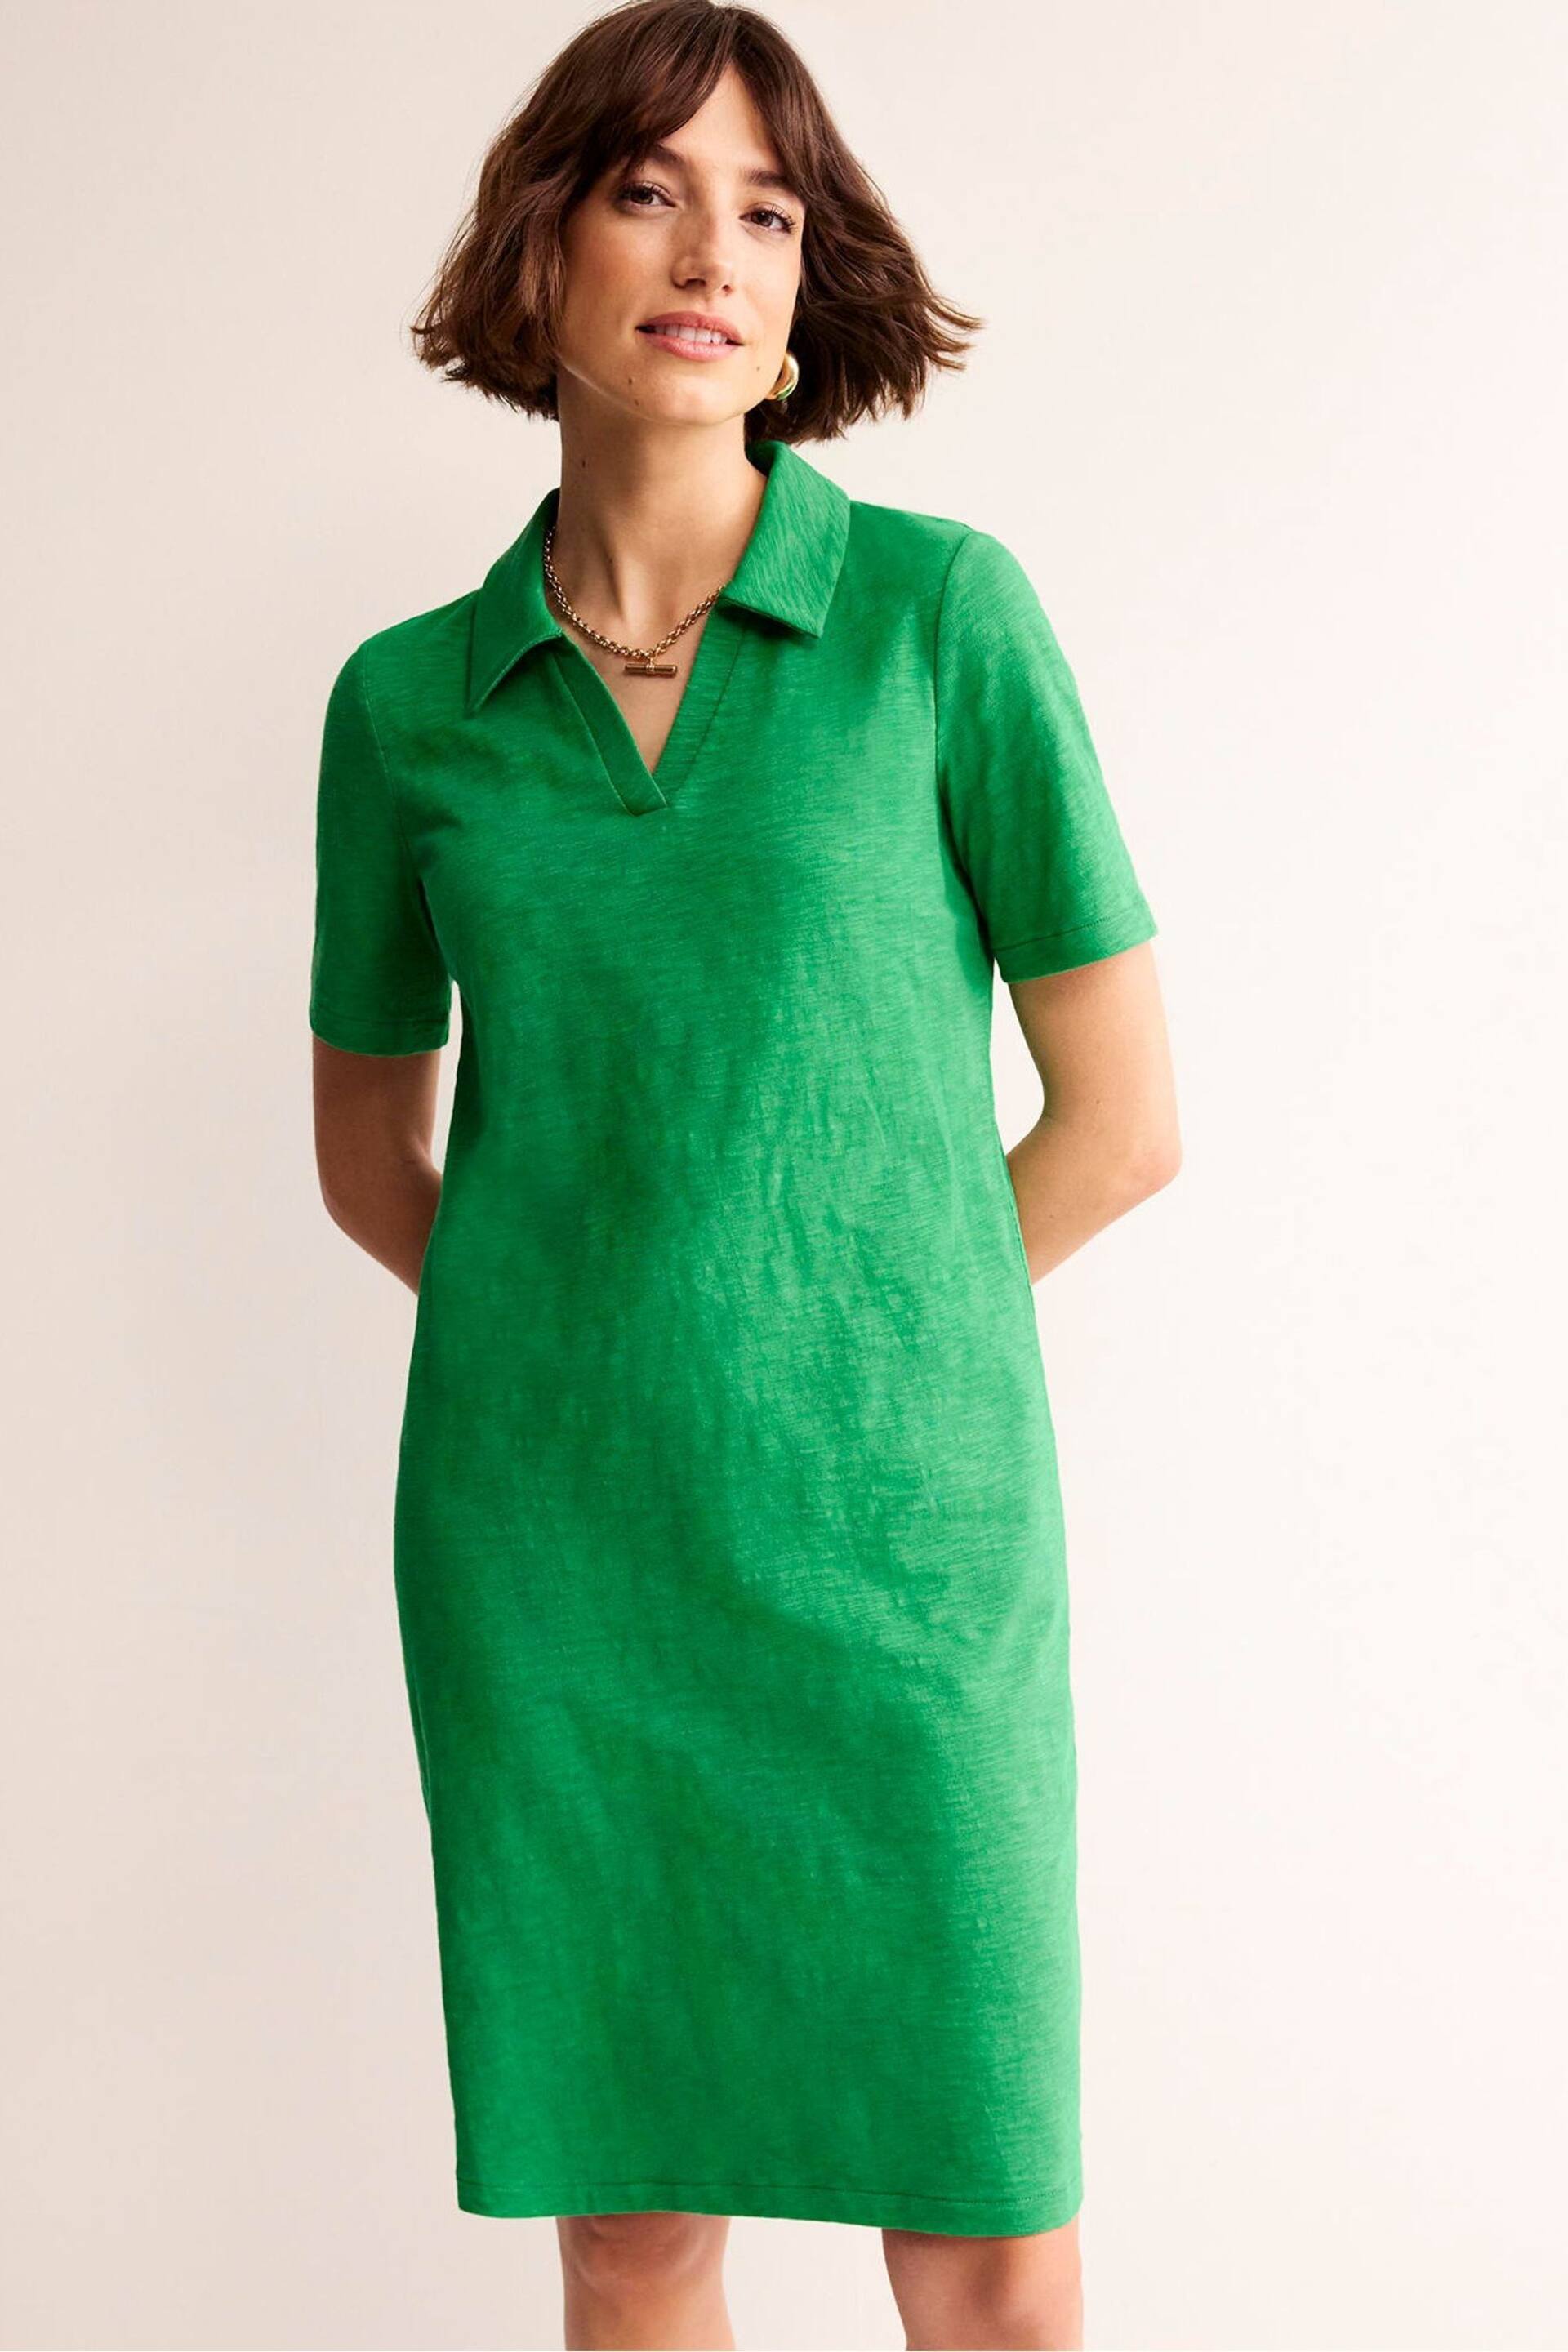 Boden Green Ingrid Polo Cotton Dress - Image 1 of 5